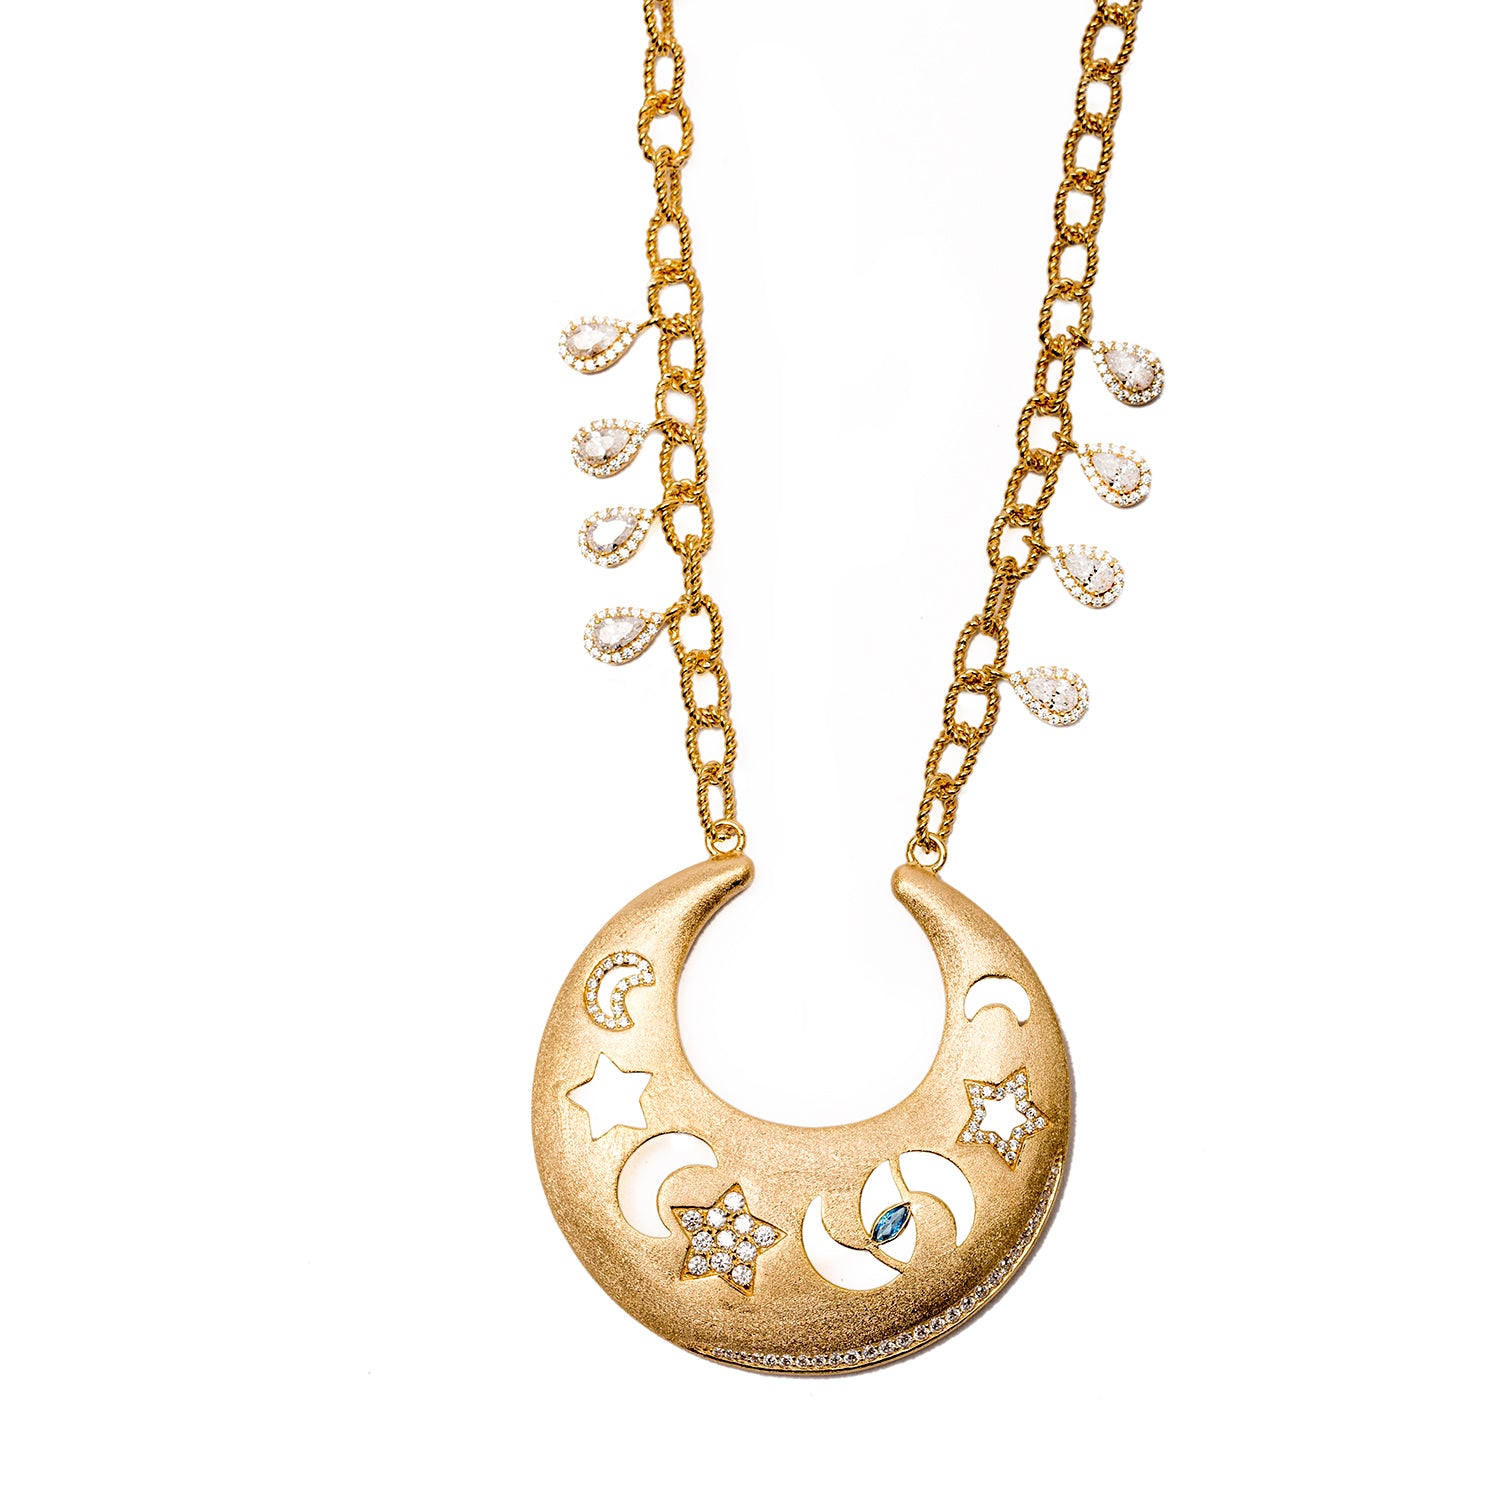 Celestial Necklace With Moons, Stars And Protective Eye In Vermeil Gold